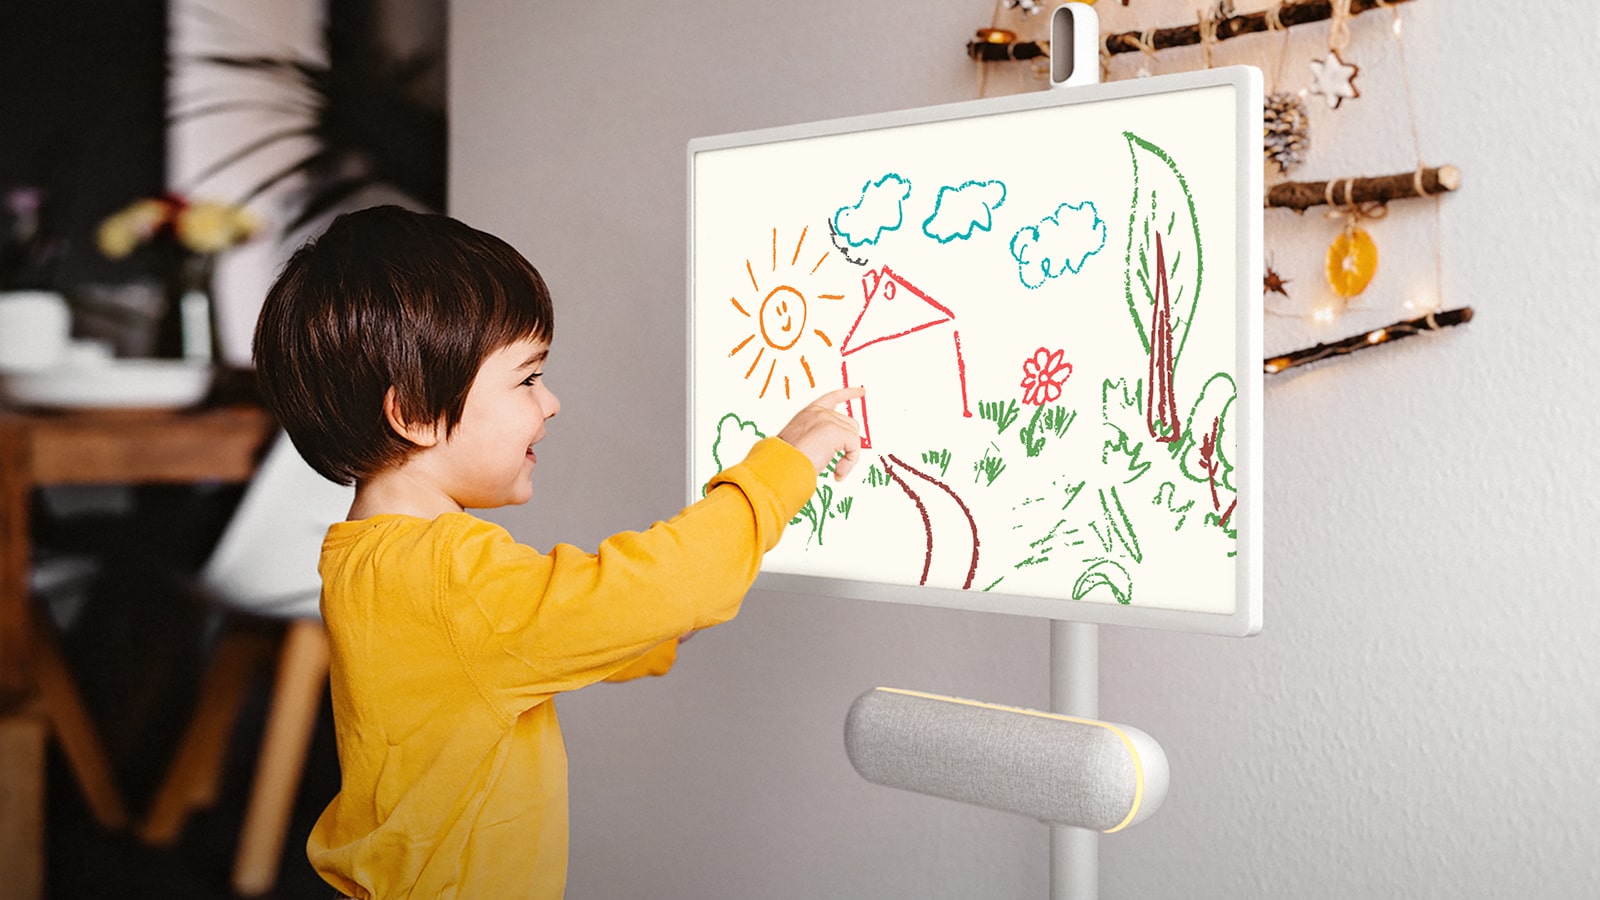 The LG StanbyME is placed in the kitchen with the XT7S speaker attached. A child draws on the screen, and the speaker's yellow mood lighting is on.